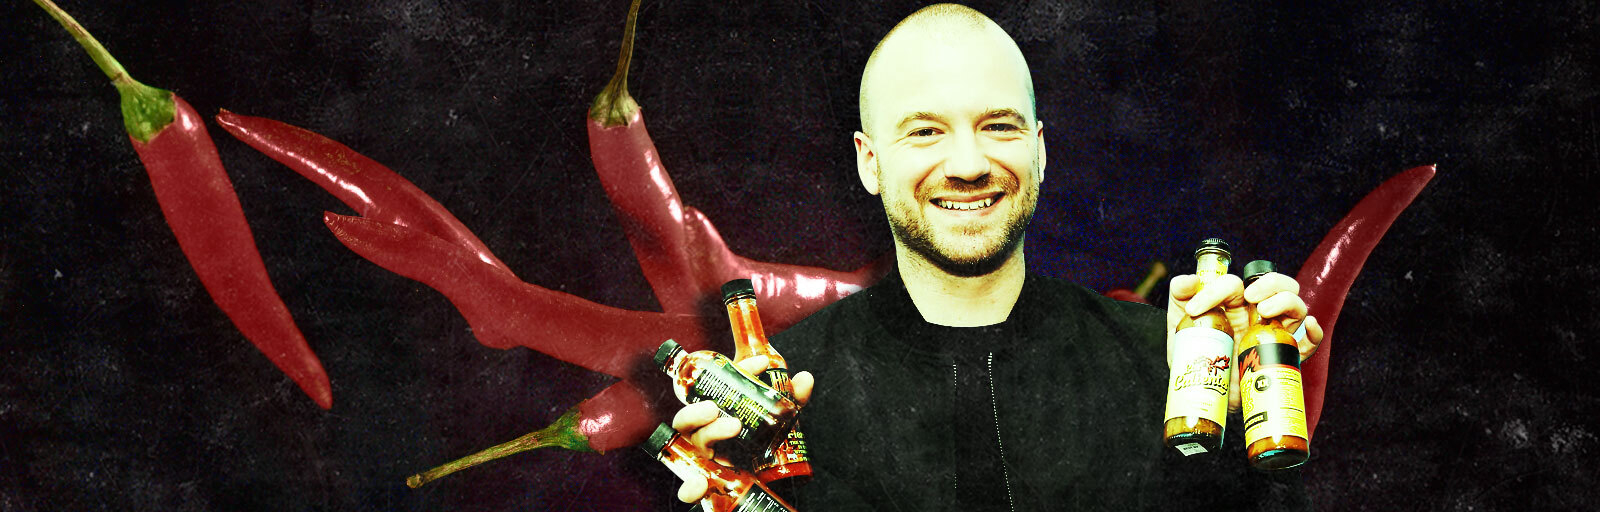 Sean Evans Talks Fave Hot Sauces And Running Two Shows Amid COVID-19